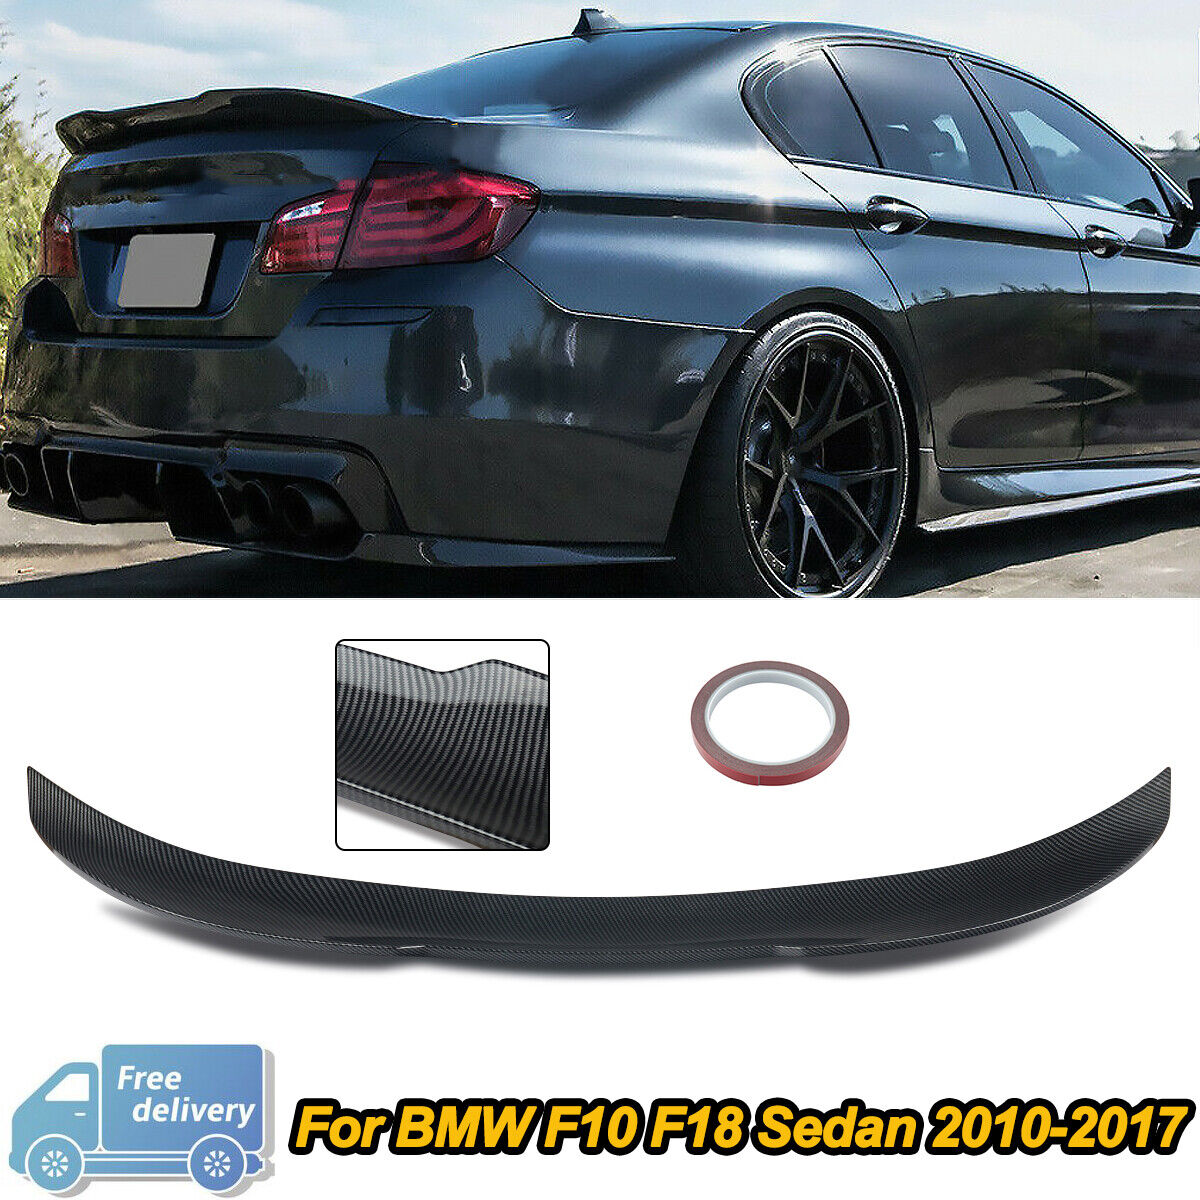 PSM Style Rear Spoiler Lip Wing For BMW 5 Series F10 F18 2010-2017 Carbon Style